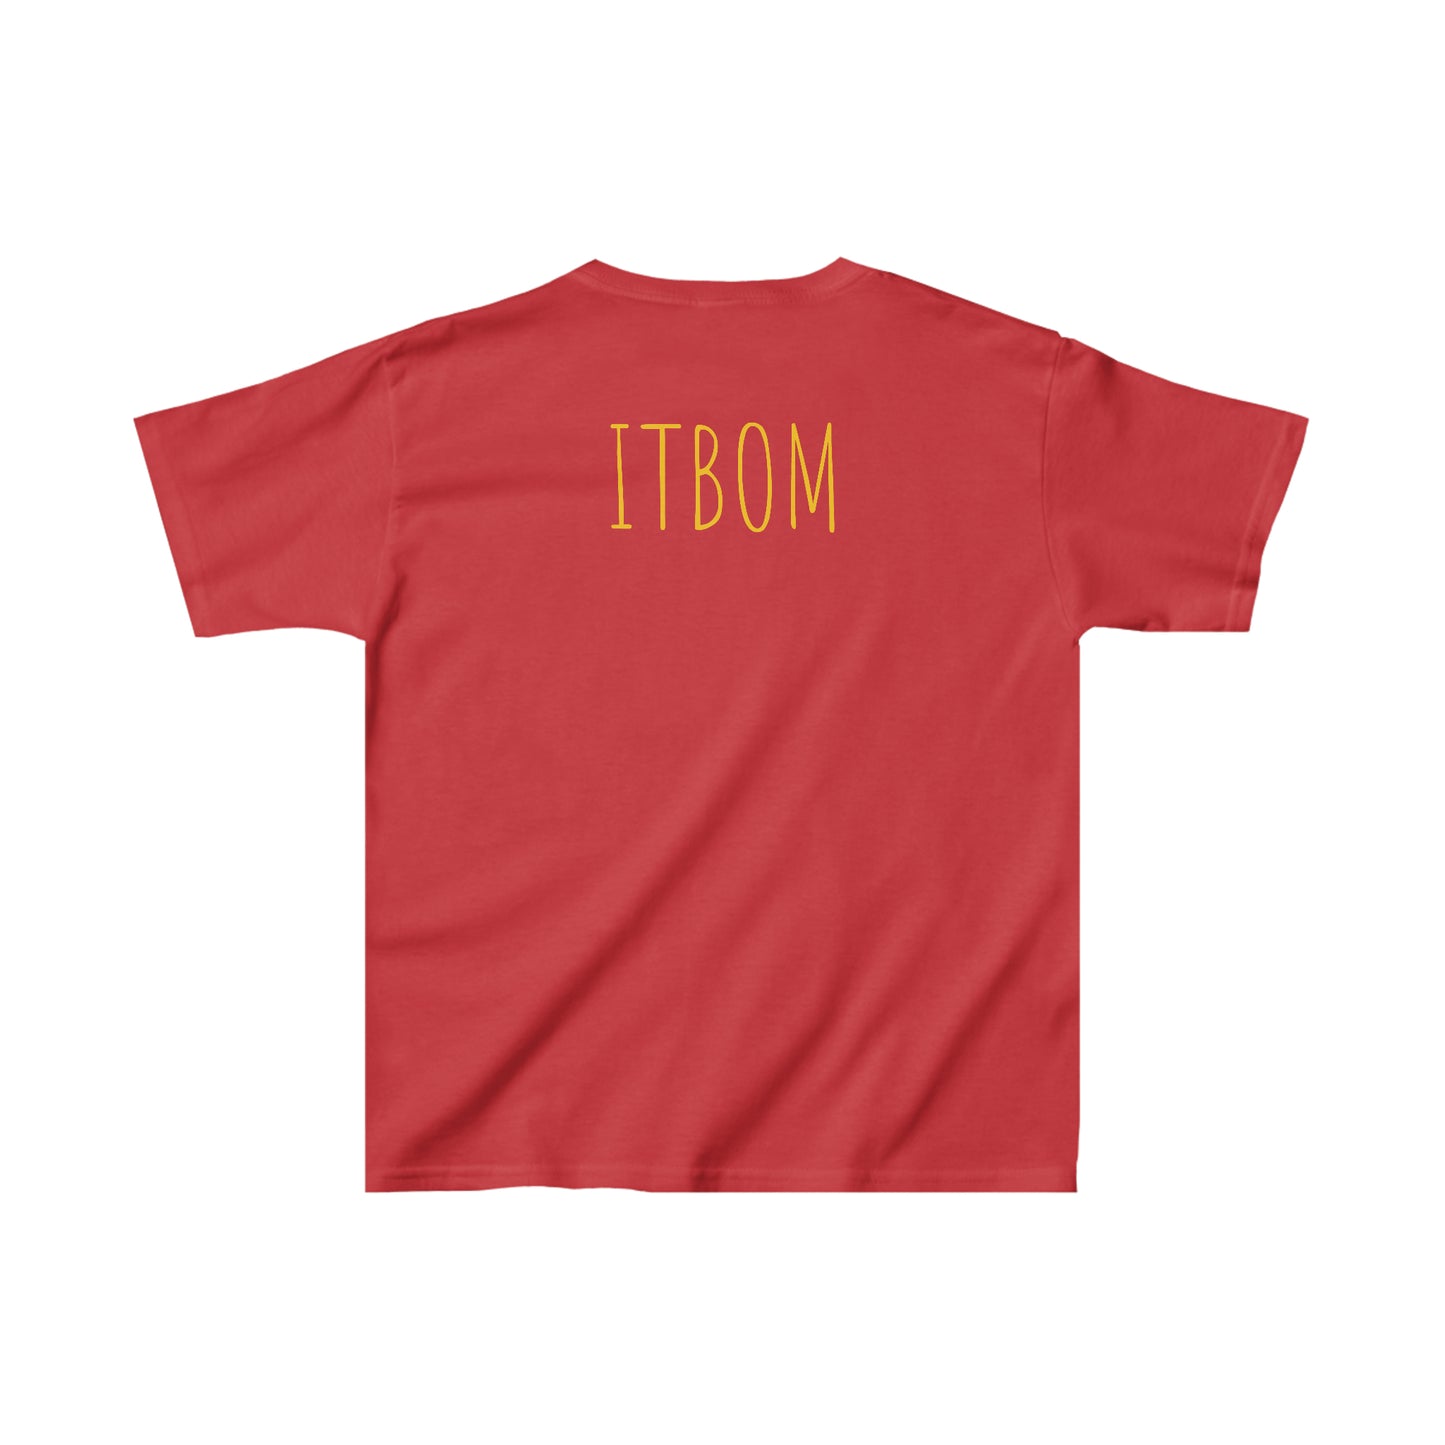 ITBOM Lion Boss Big Kids Regular Fit Heavy Cotton Short Sleeve Tee XS-XL in 7 different Boss-Some colors